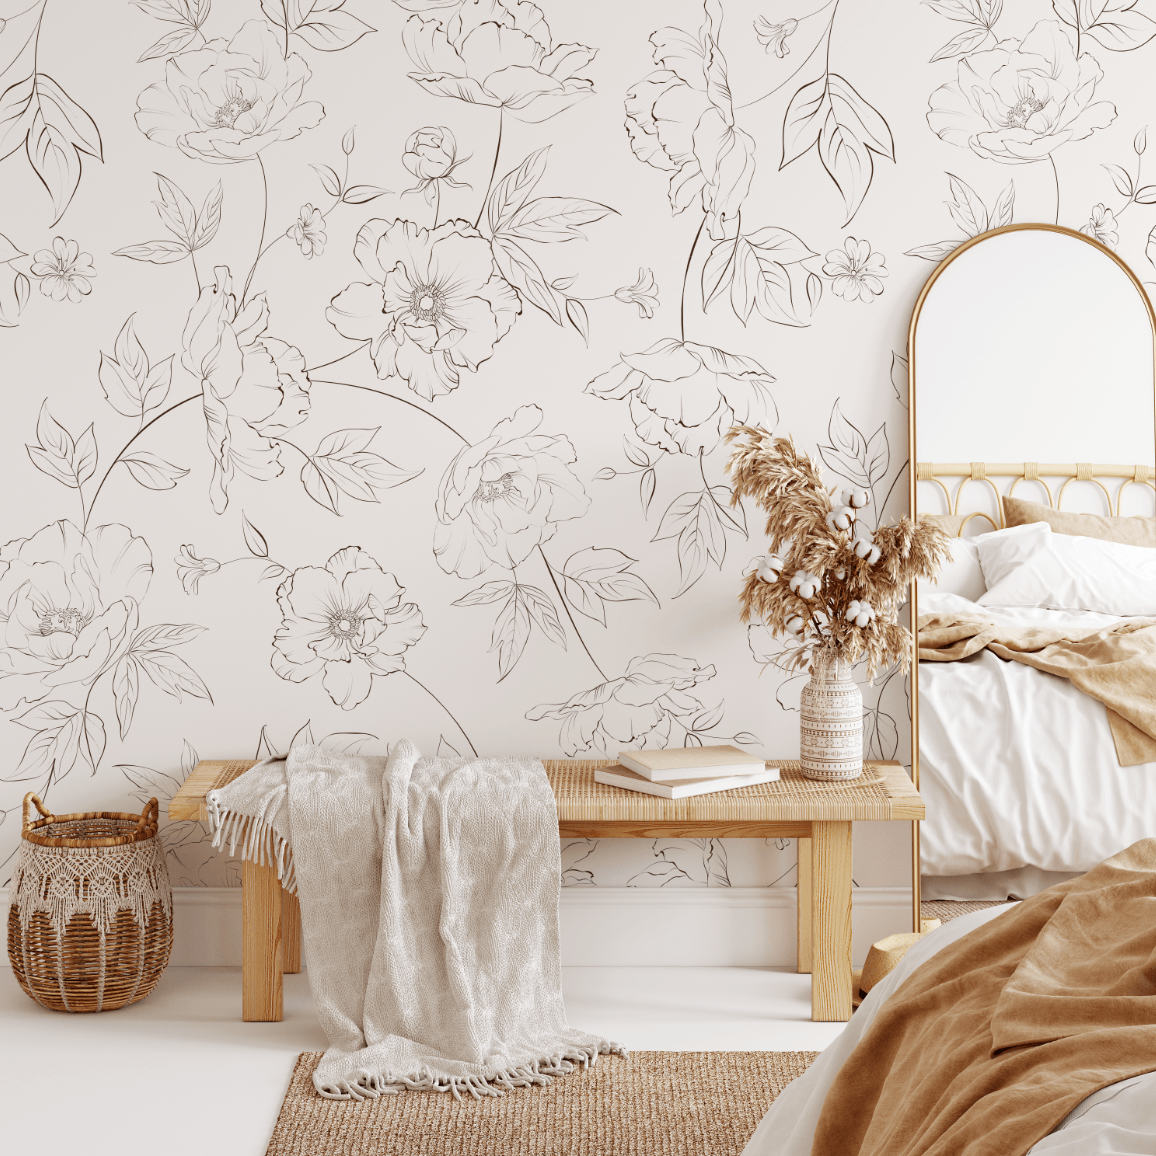 Buy Woodland Trees Removable Wallpaper  Nursery Wallpaper  Online in  India  Etsy